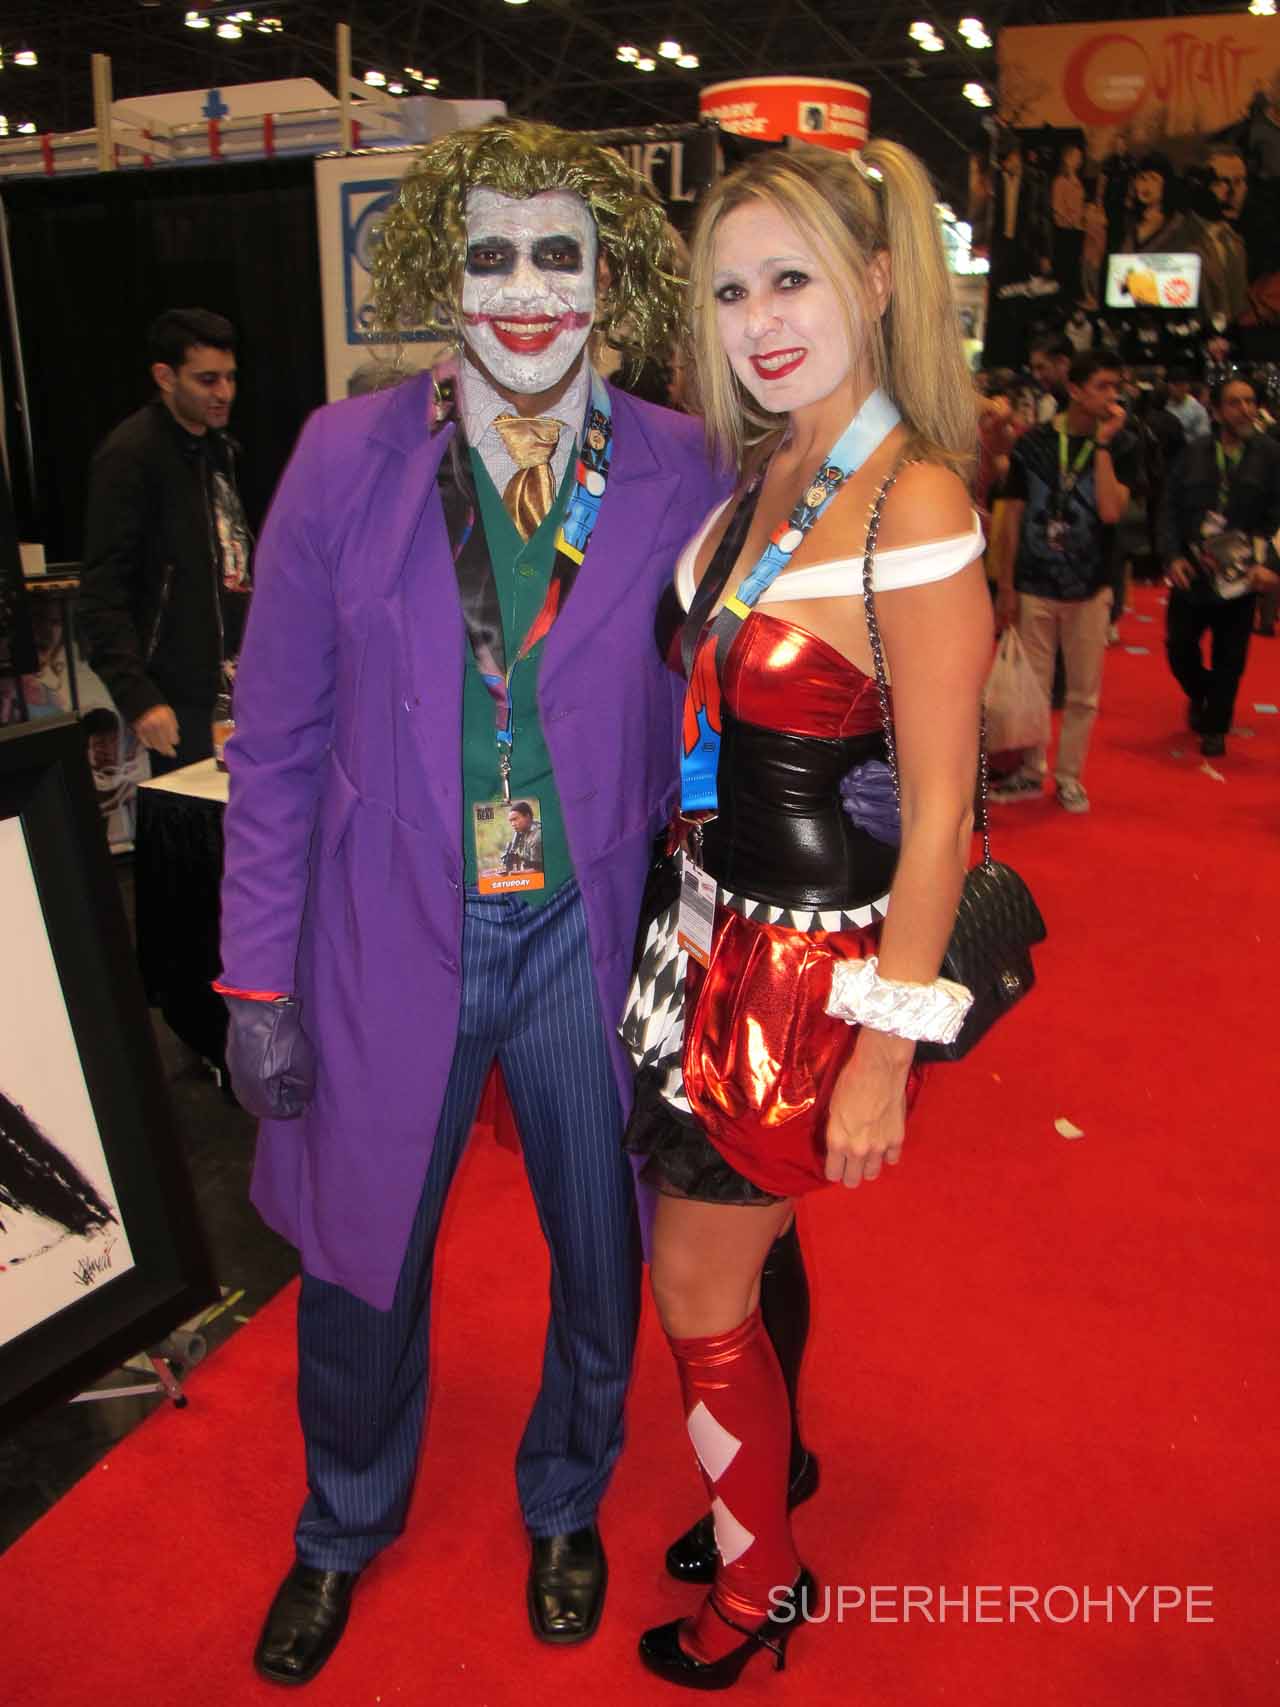 More Cosplay Photos from the 2015 New York Comic Con! - Comic Book ...